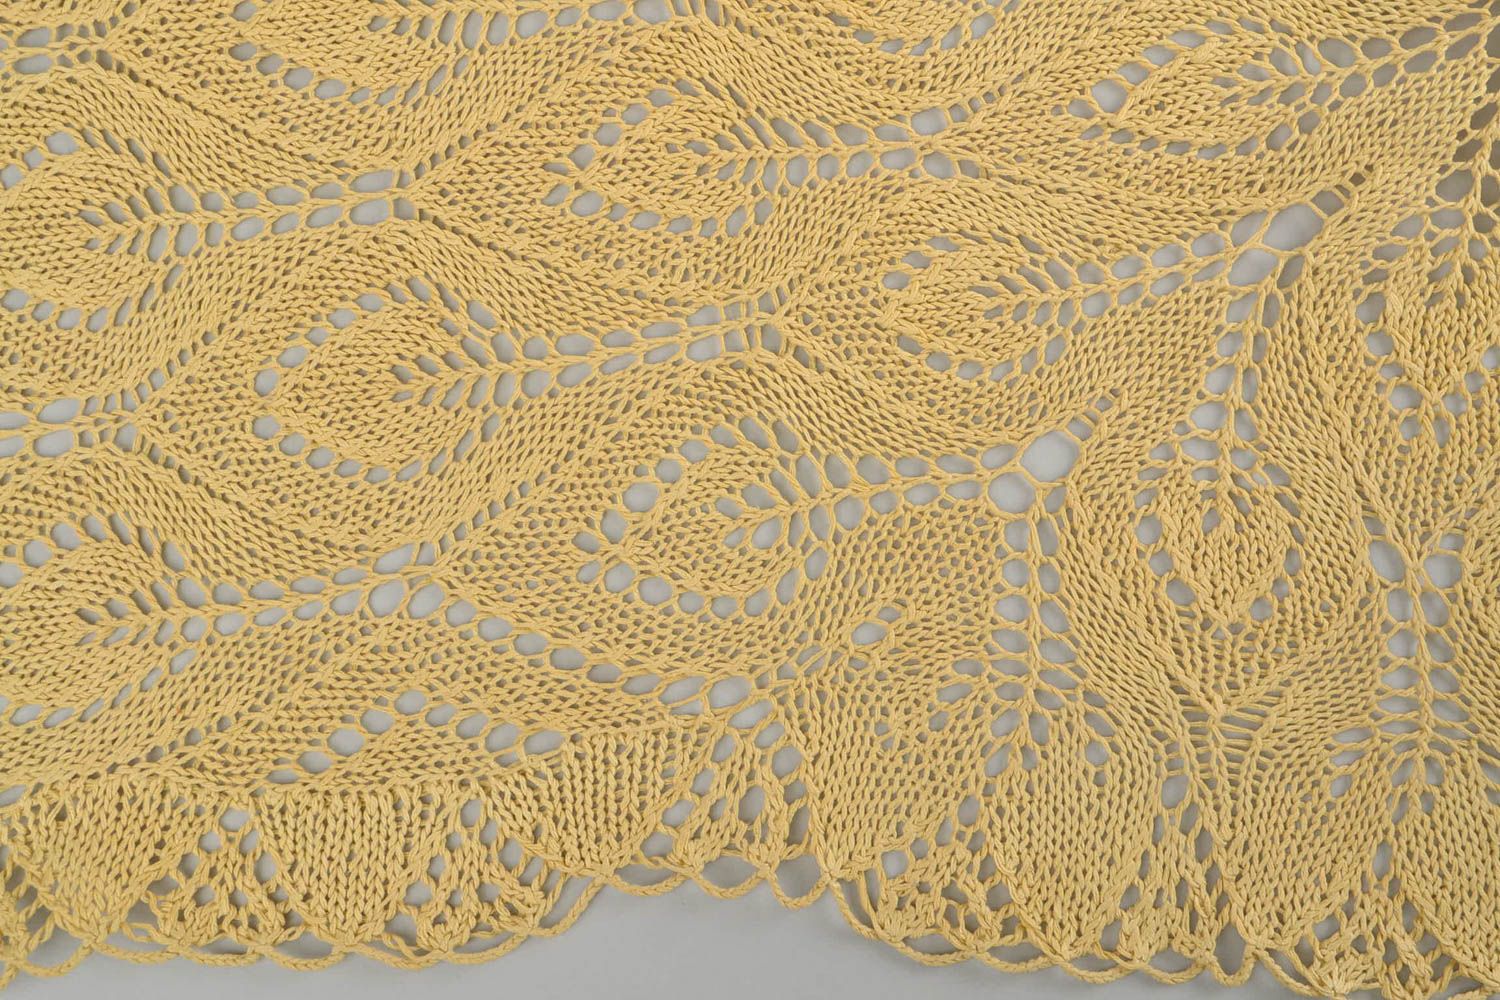 Openwork knitted tablecloth handmade decor napkin for coffee table decor ideas photo 5